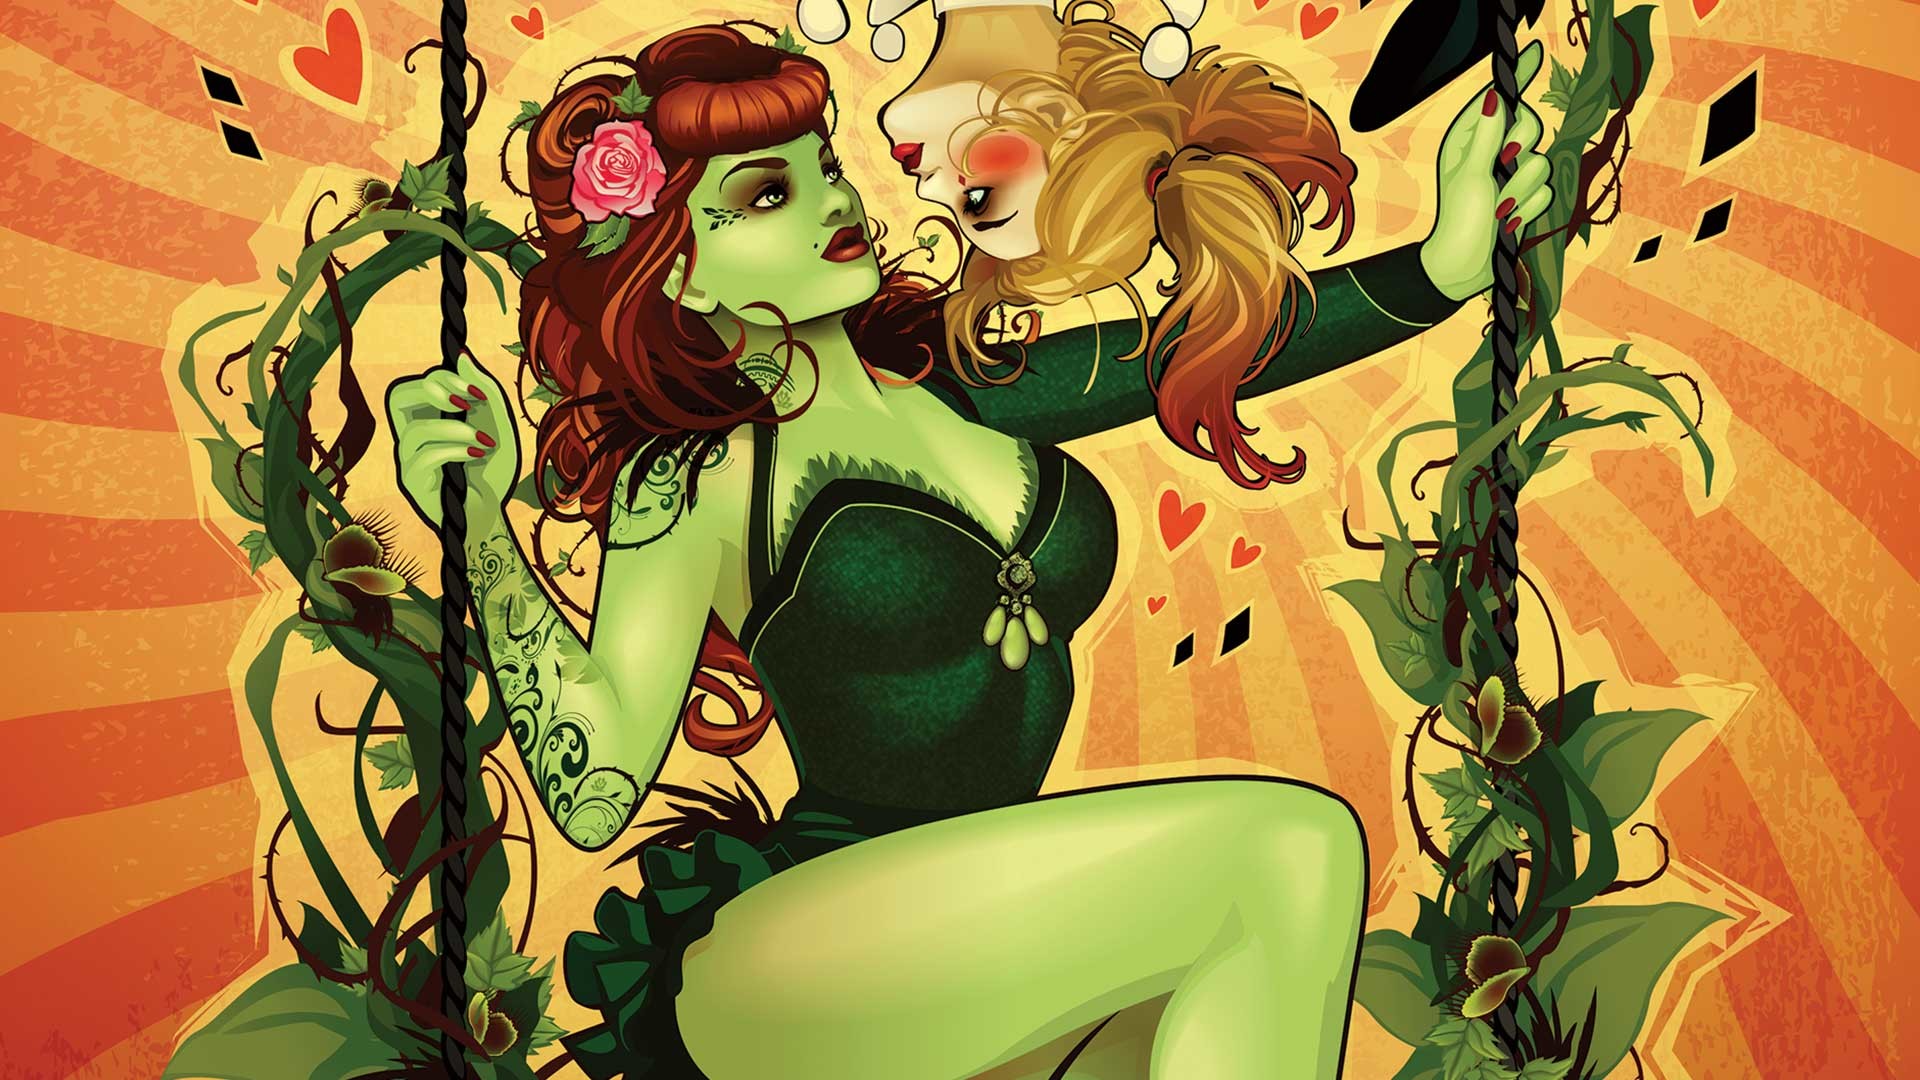 DC COMICS BOMBSHELLS cover by Ant Lucia